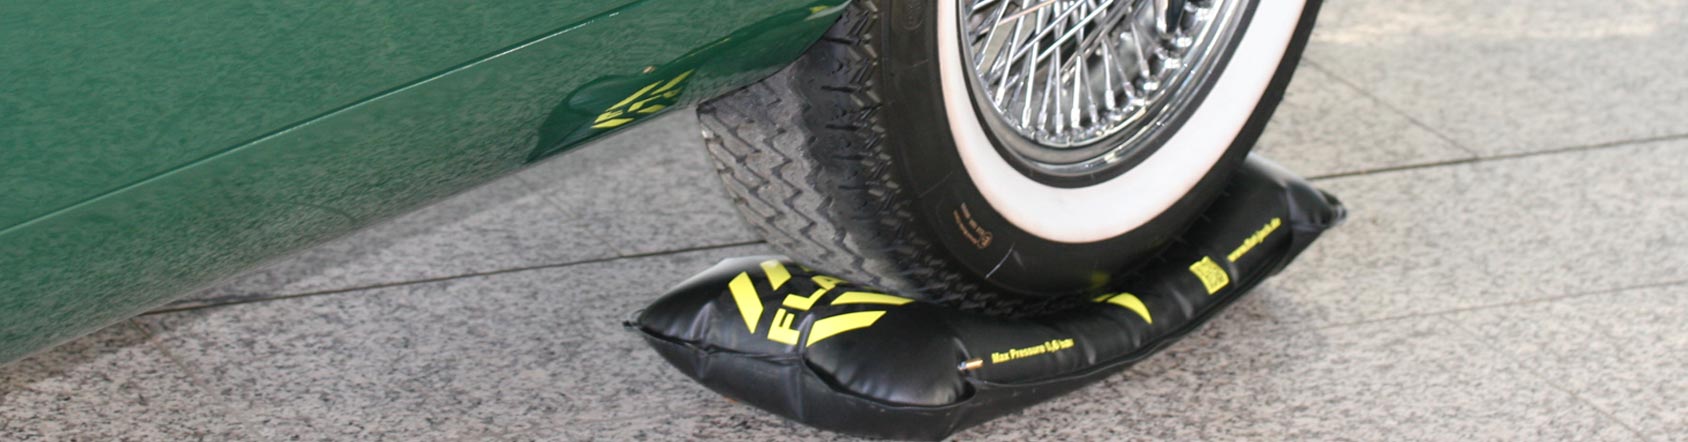 Tyre protection stopping flat spots